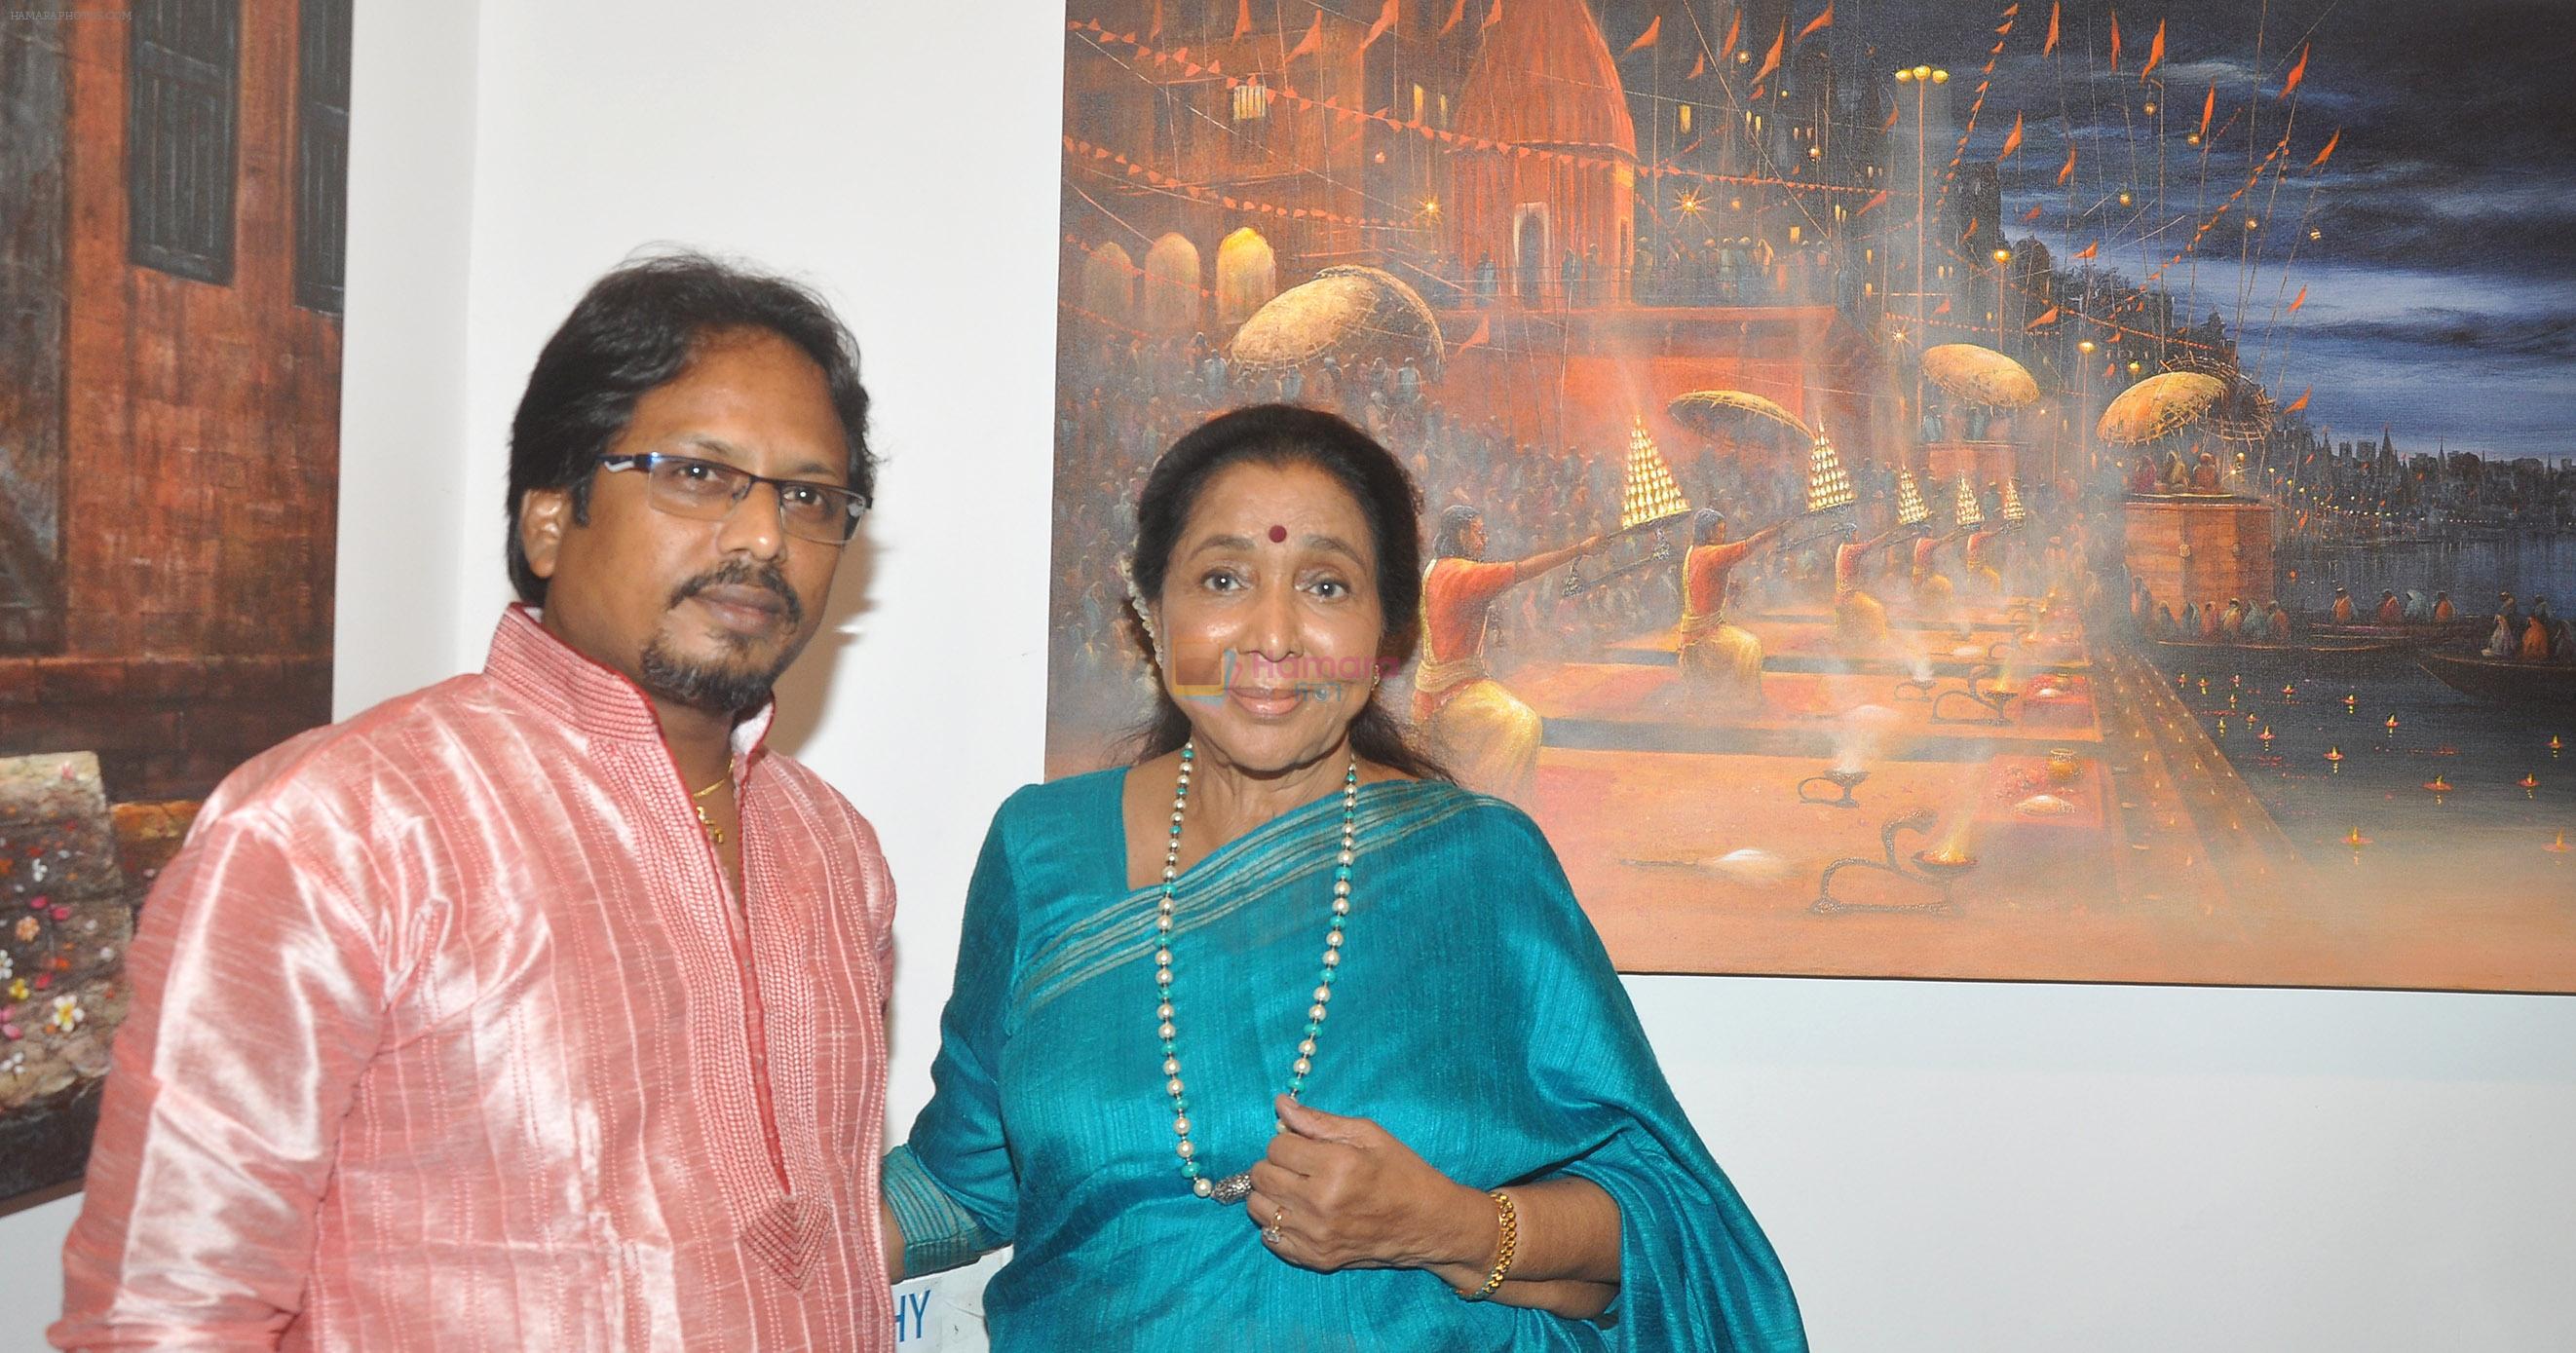 Artist Paramesh Paul with Asha Bhosle at the inauguration of his show Glory of the Ganges at Jehangir Art Gallery